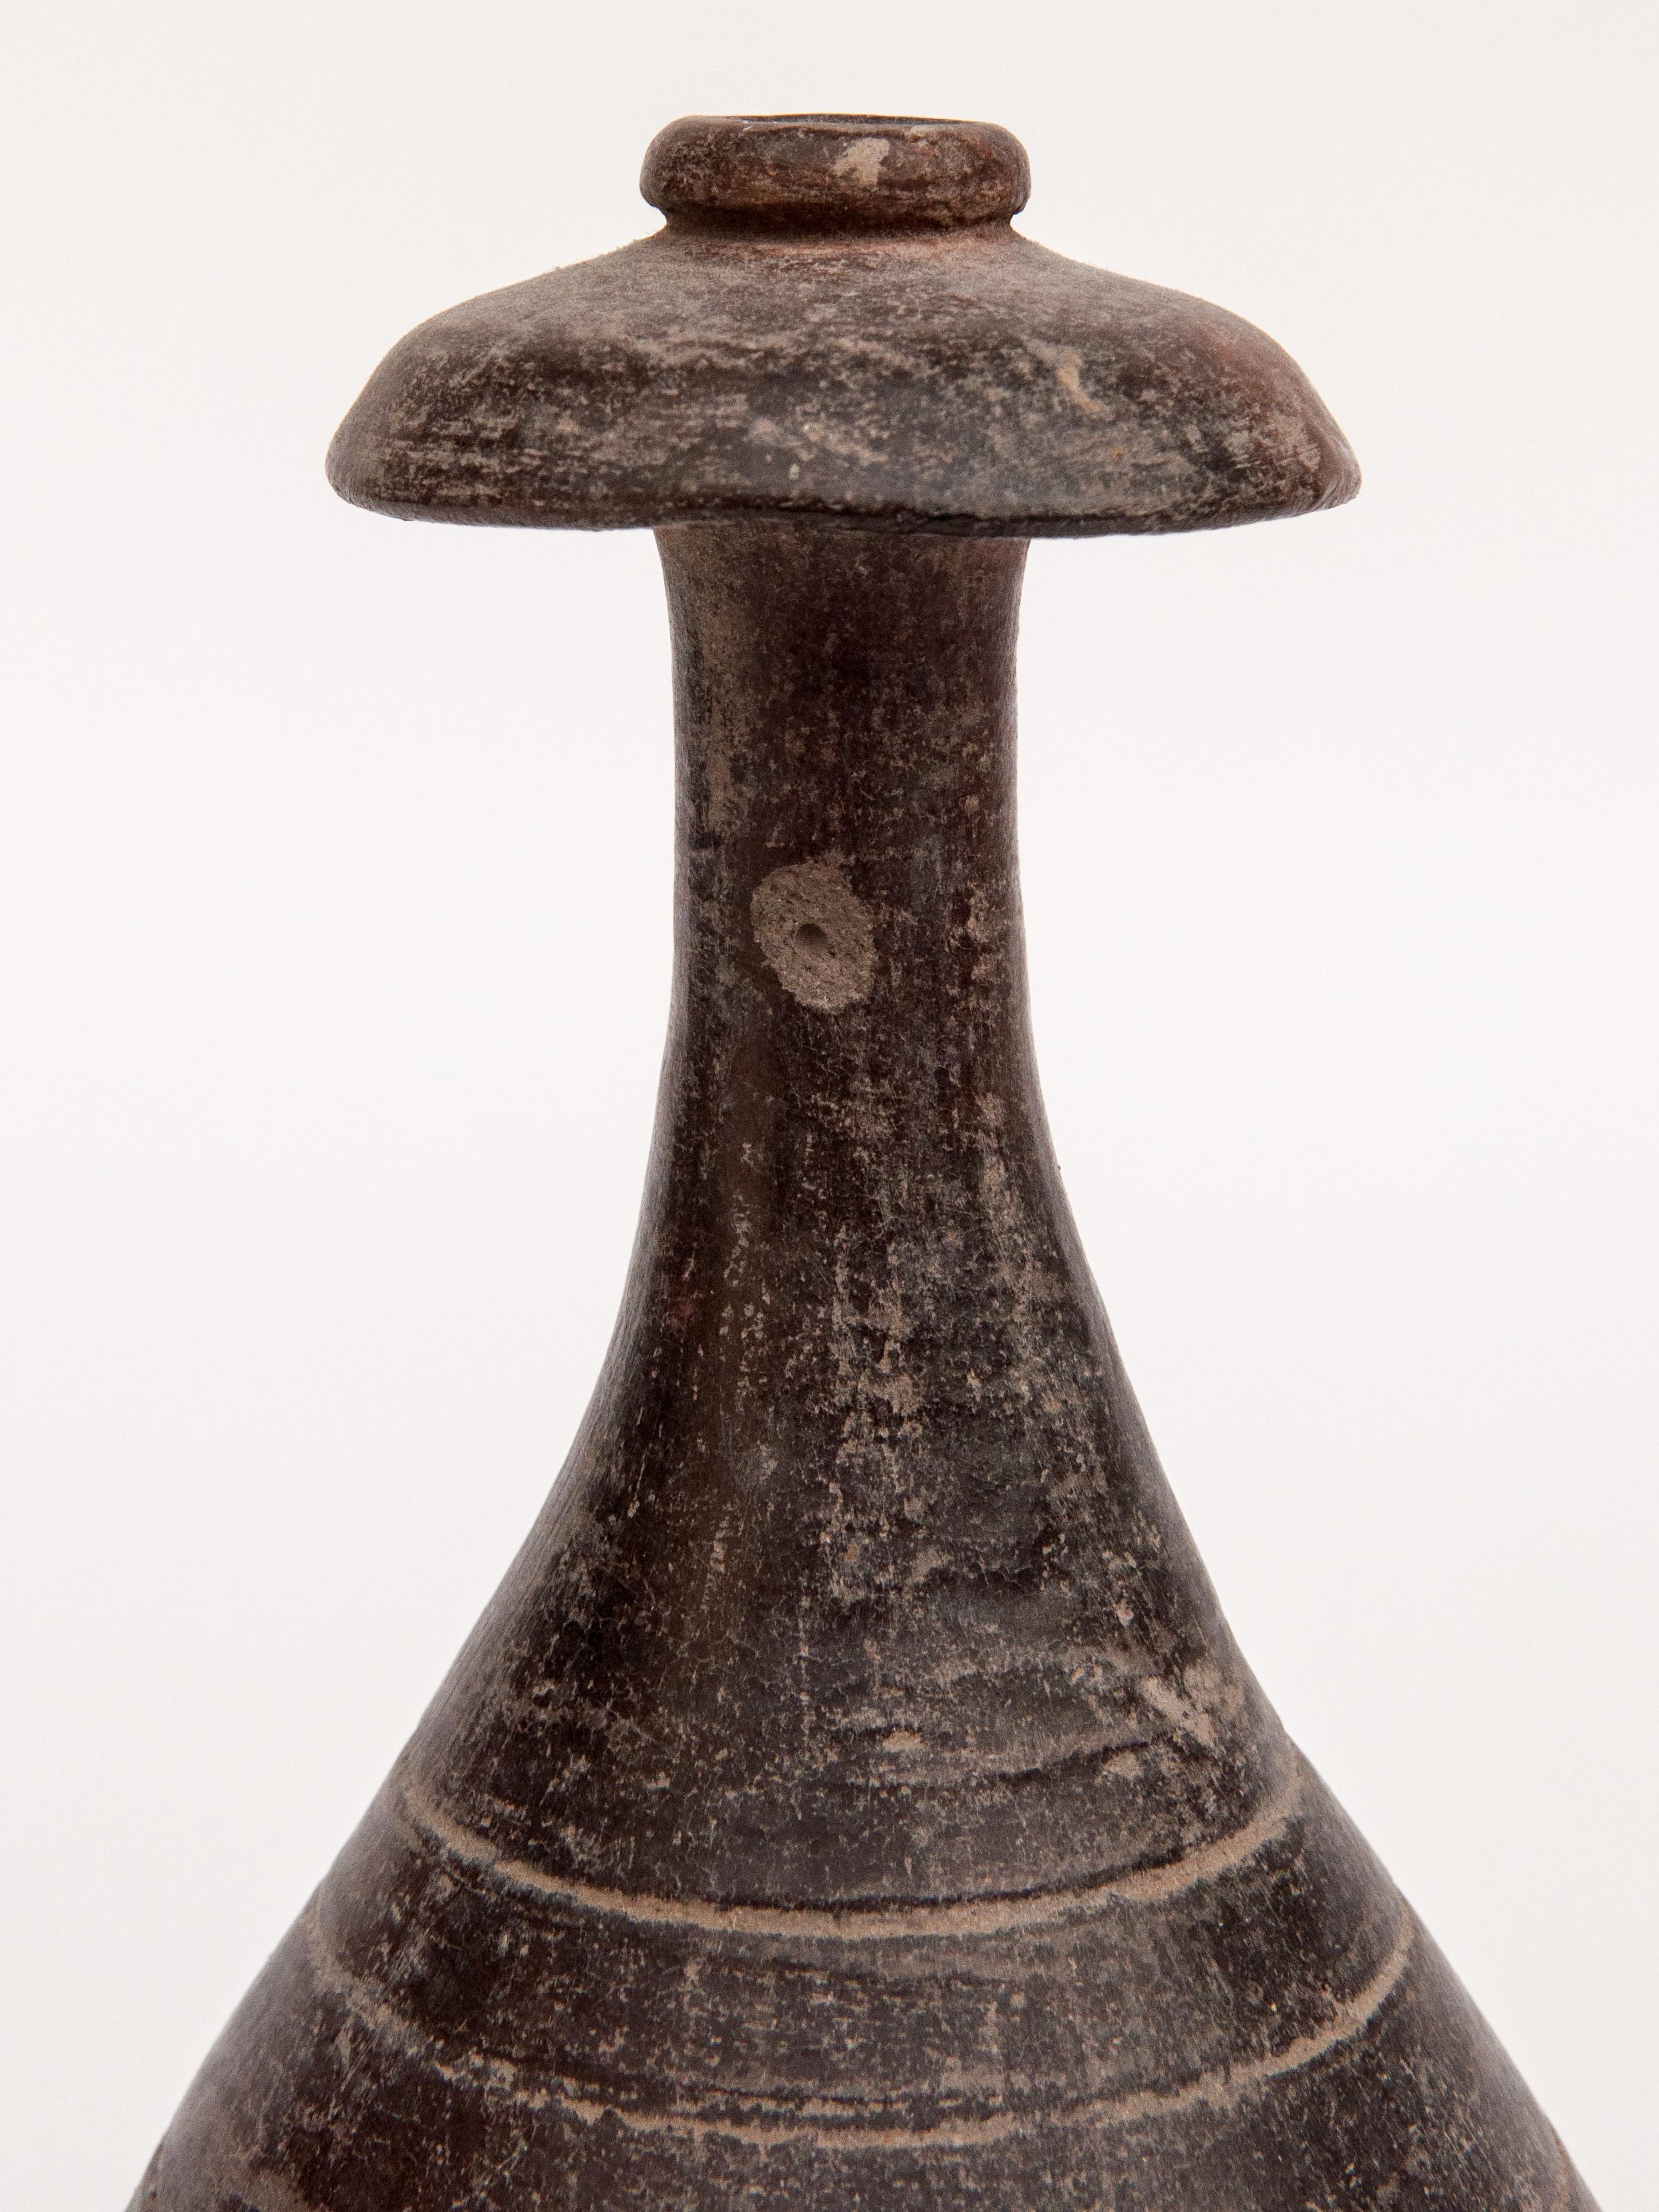 Old Unglazed Earthenware Kendi. Majapahit style. North or East Java, late 19th century.
Kendi are pouring and drinking vessels found throughout Southeast Asia since ancient times, and were used in day to day life, as well as for ritual purposes. The